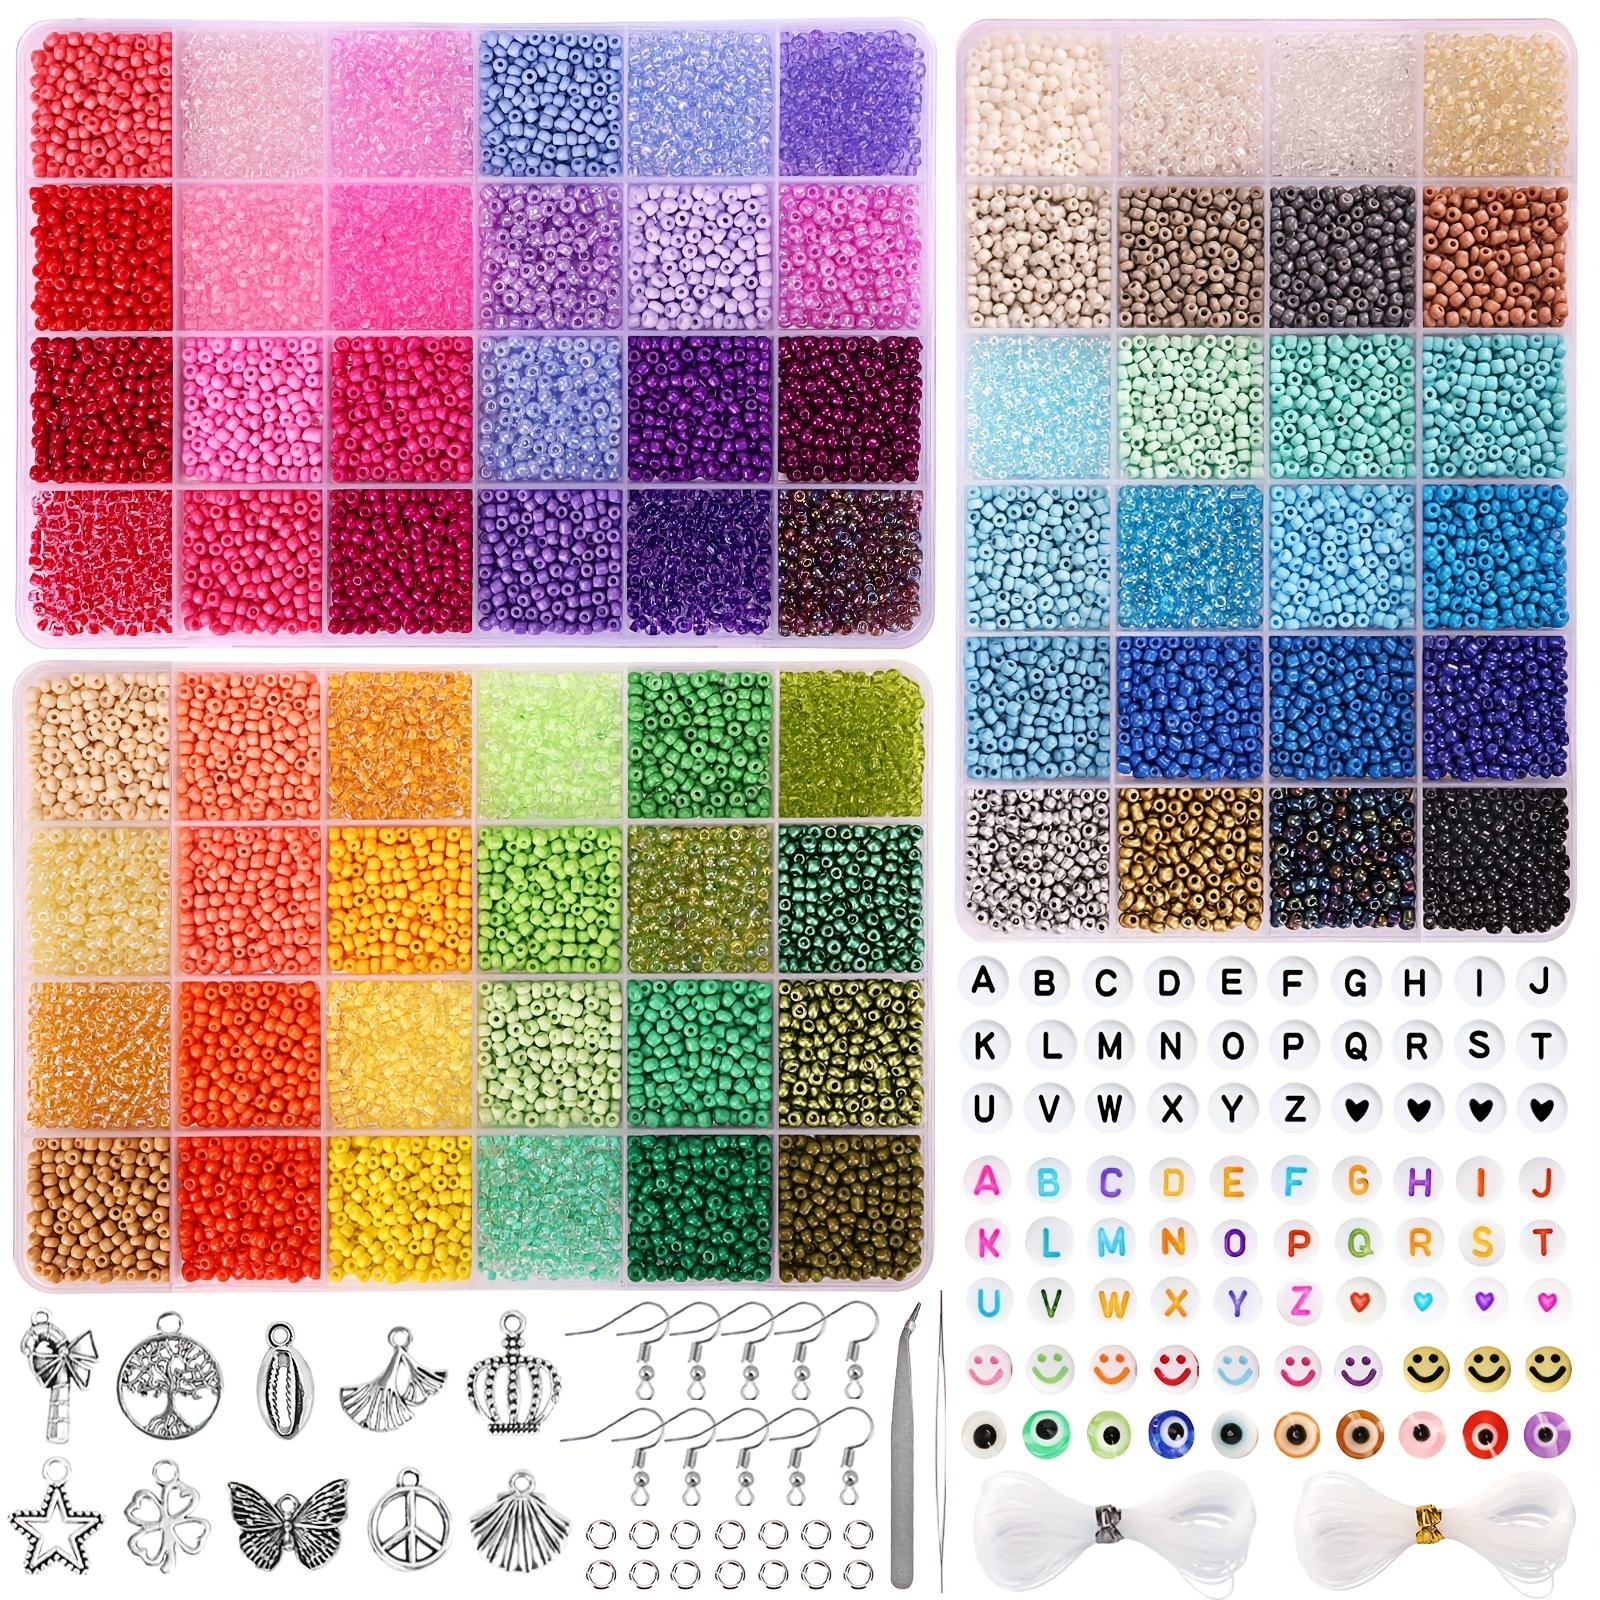 8600 Pcs 4mm 6/0 48 Colors Glass Seed Beads, Charms Bracelet Jewelry Making Beads Kit Gifts Small Craft Glass Beads with Beading Elastic String for